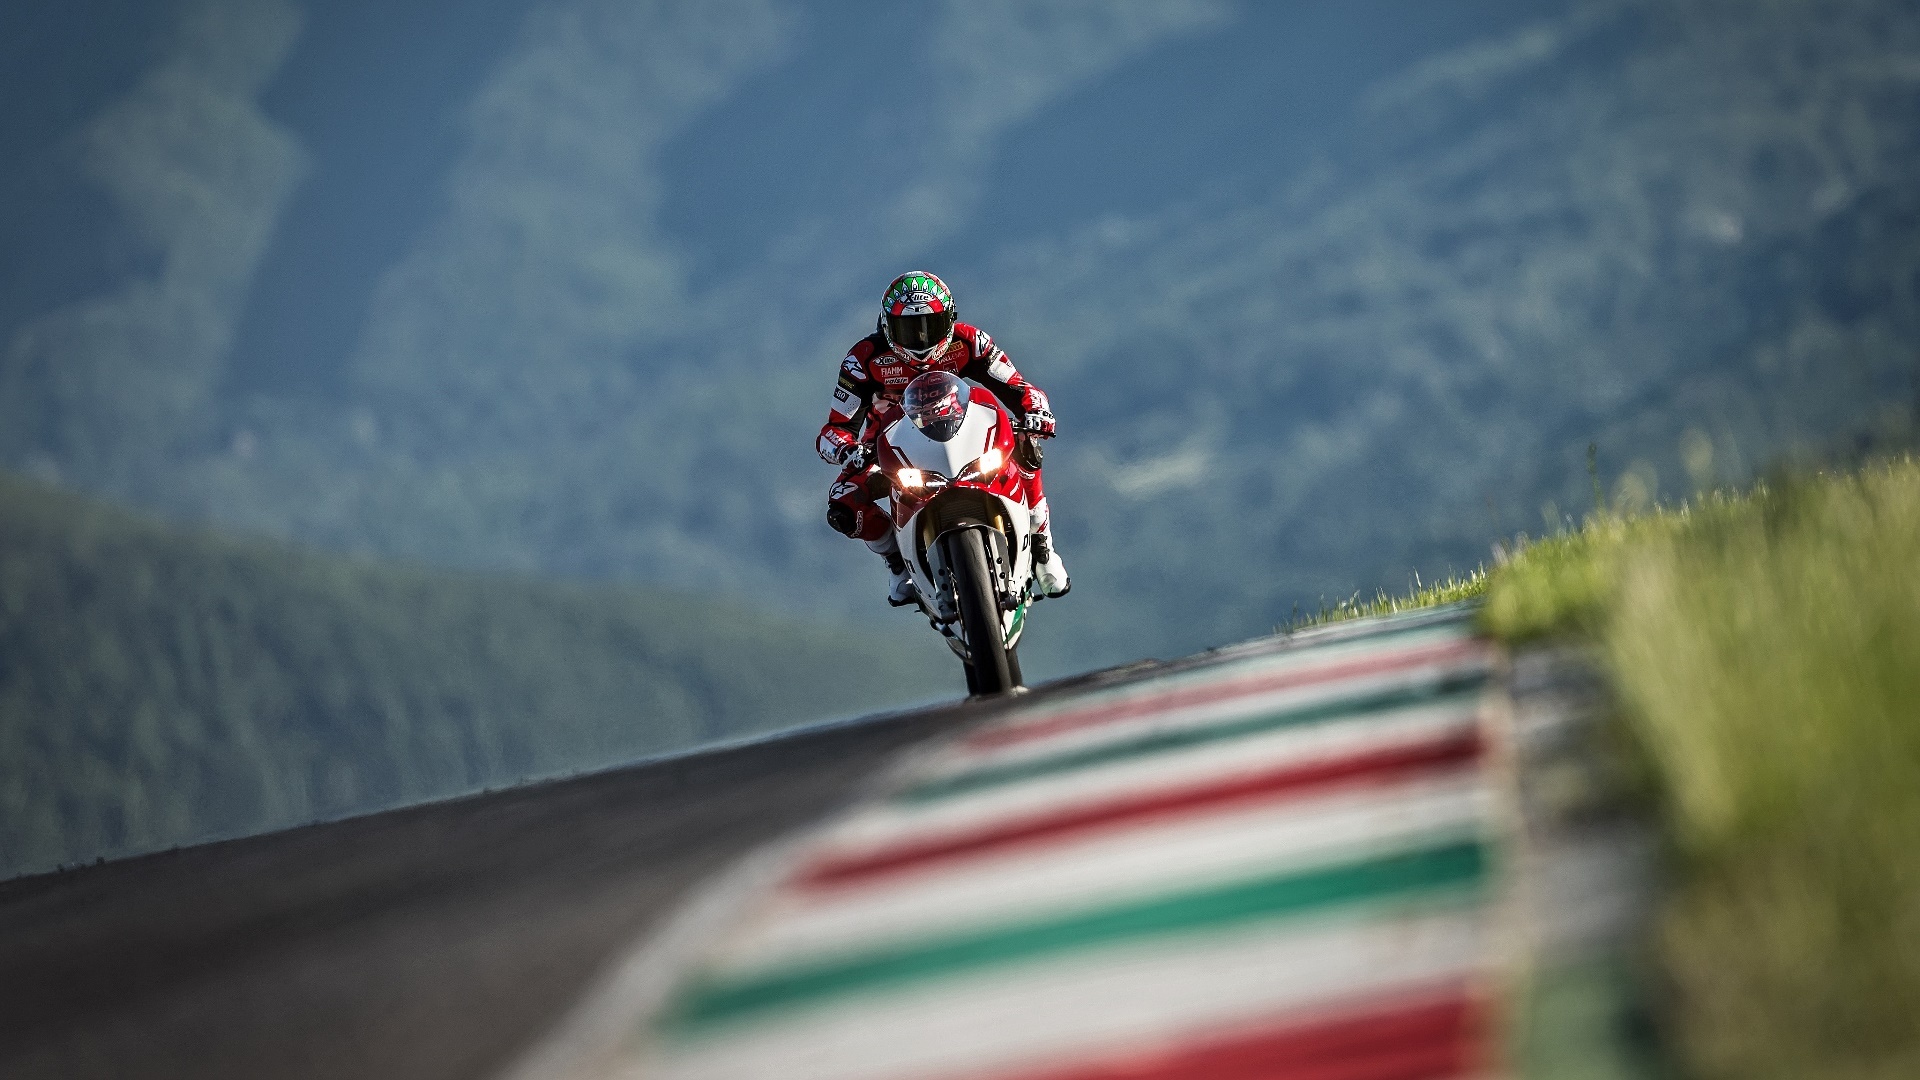 Motorcycle Racing: Ducati Final Edition, King of the Baggers Championship, Superquadro. 1920x1080 Full HD Background.